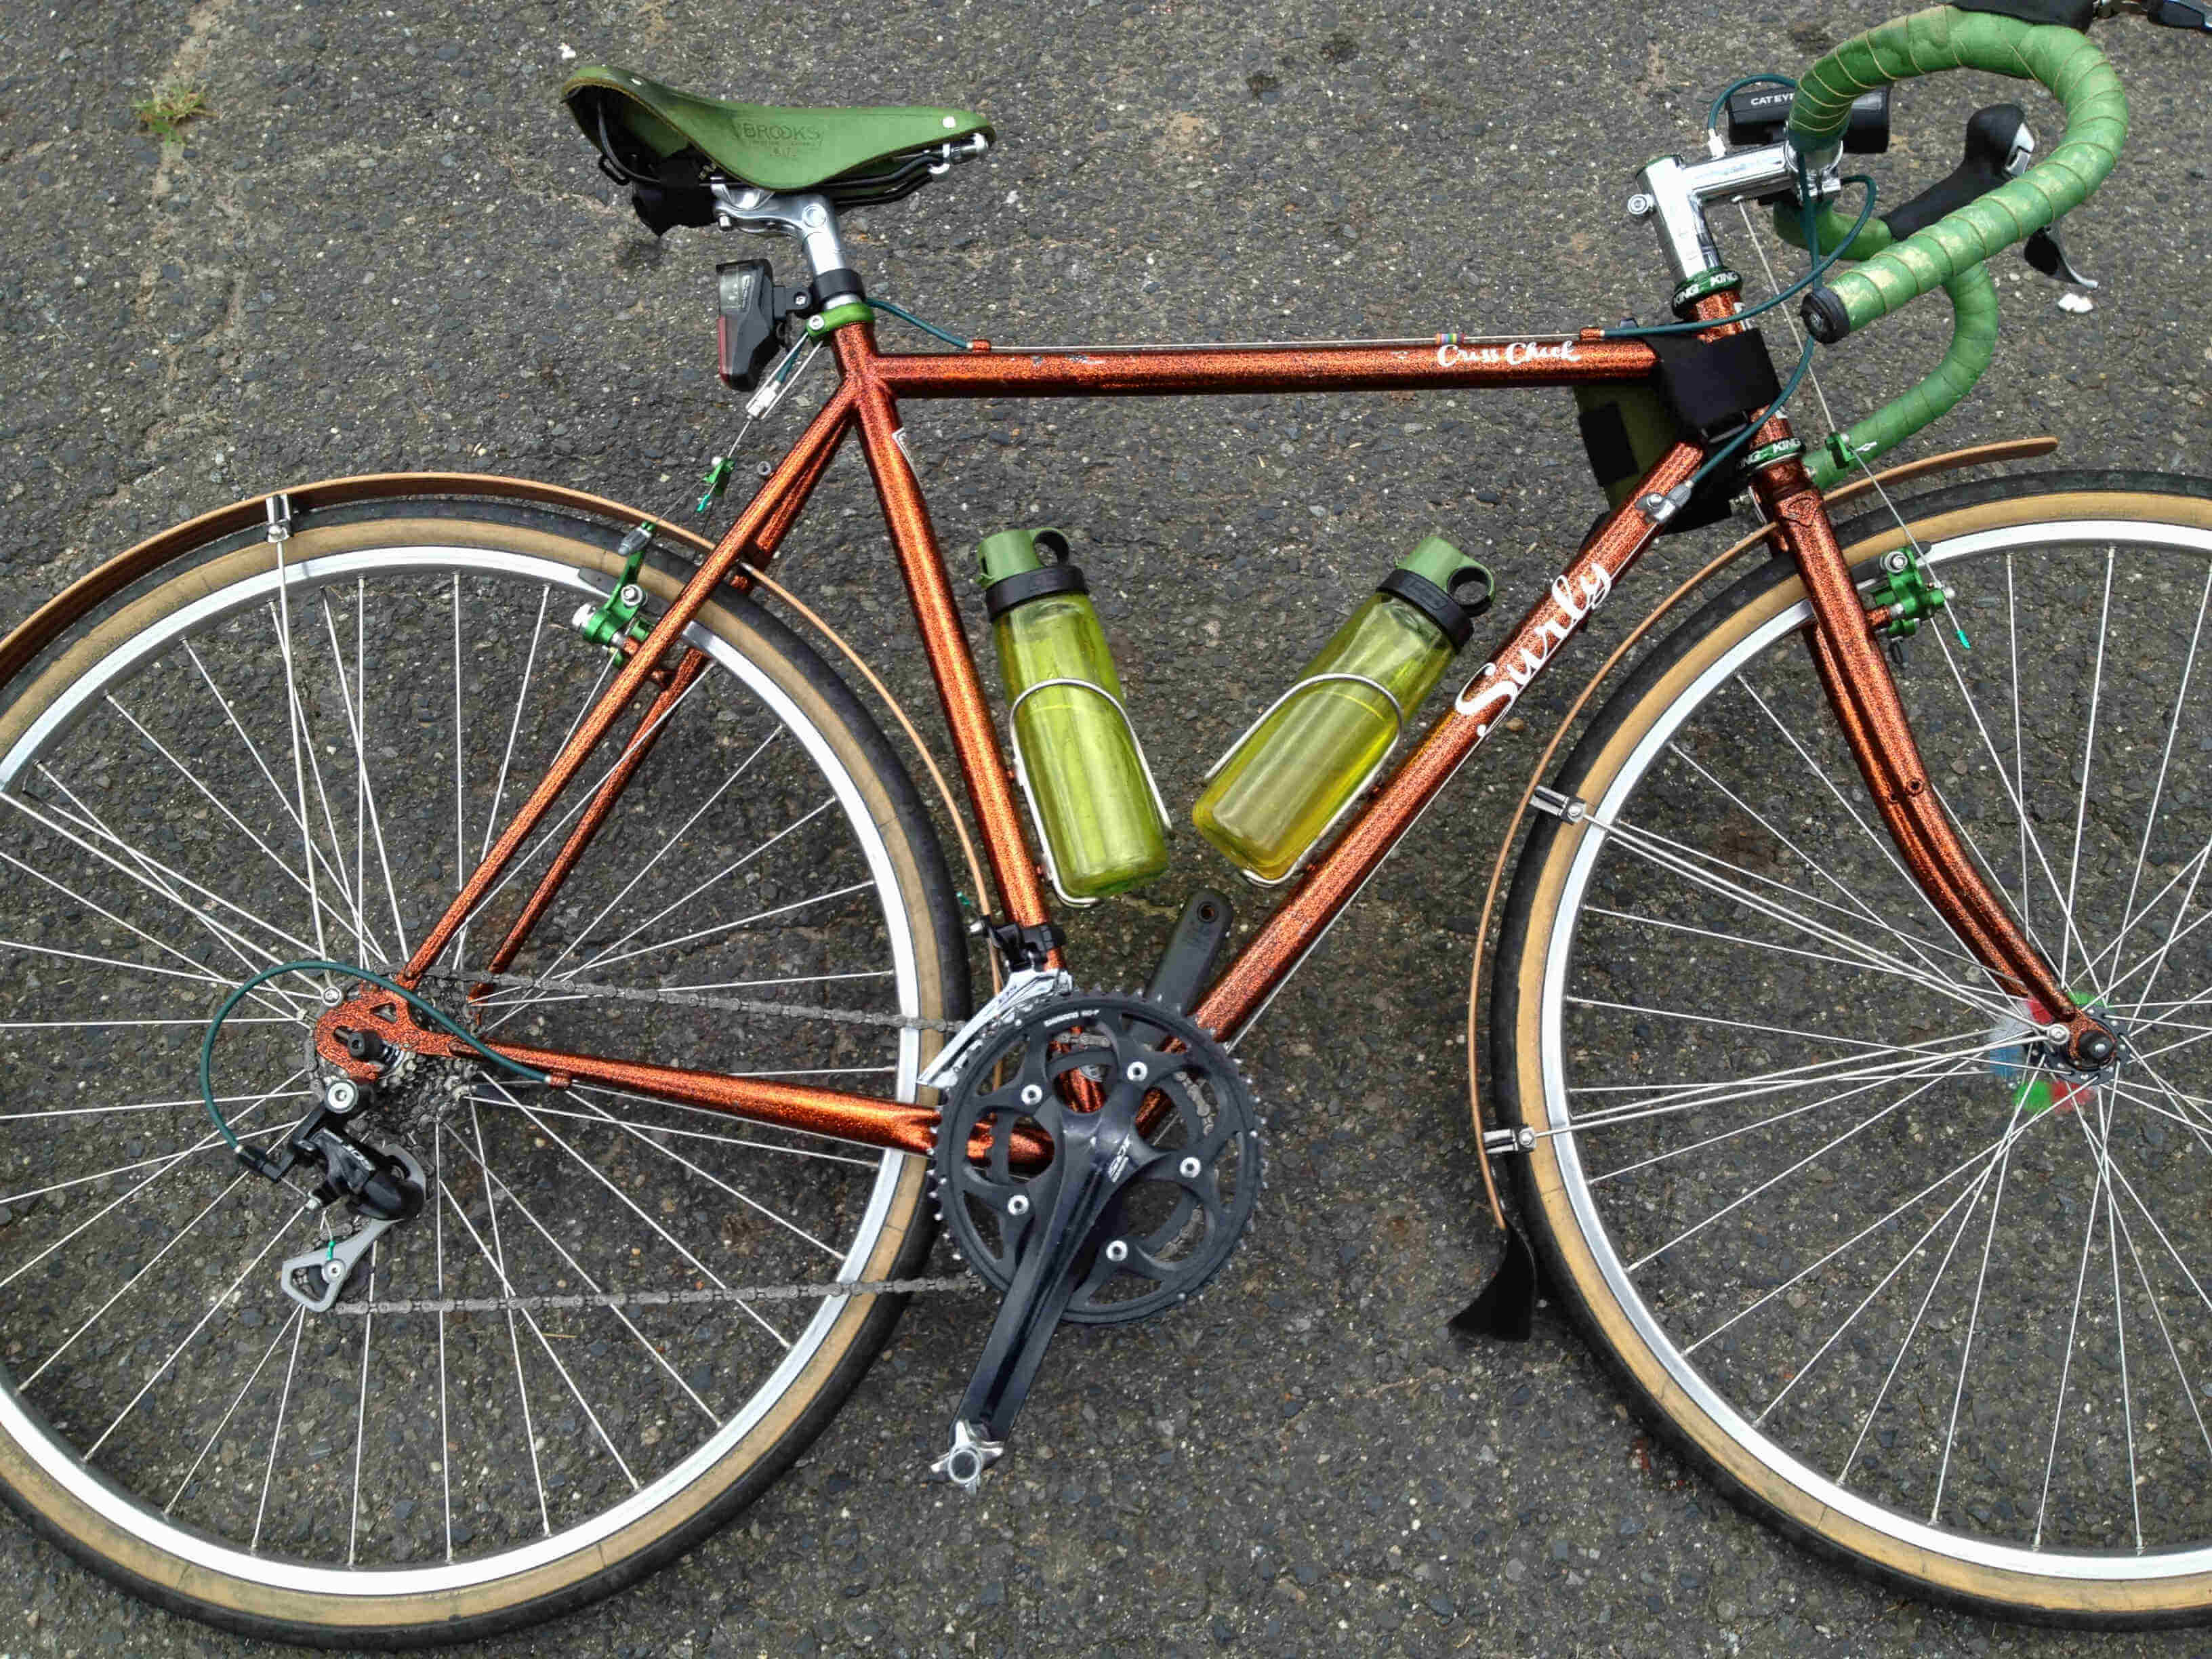 Downward, right side view of a copper Surly Cross Check bike, laying on it's left side on pavement